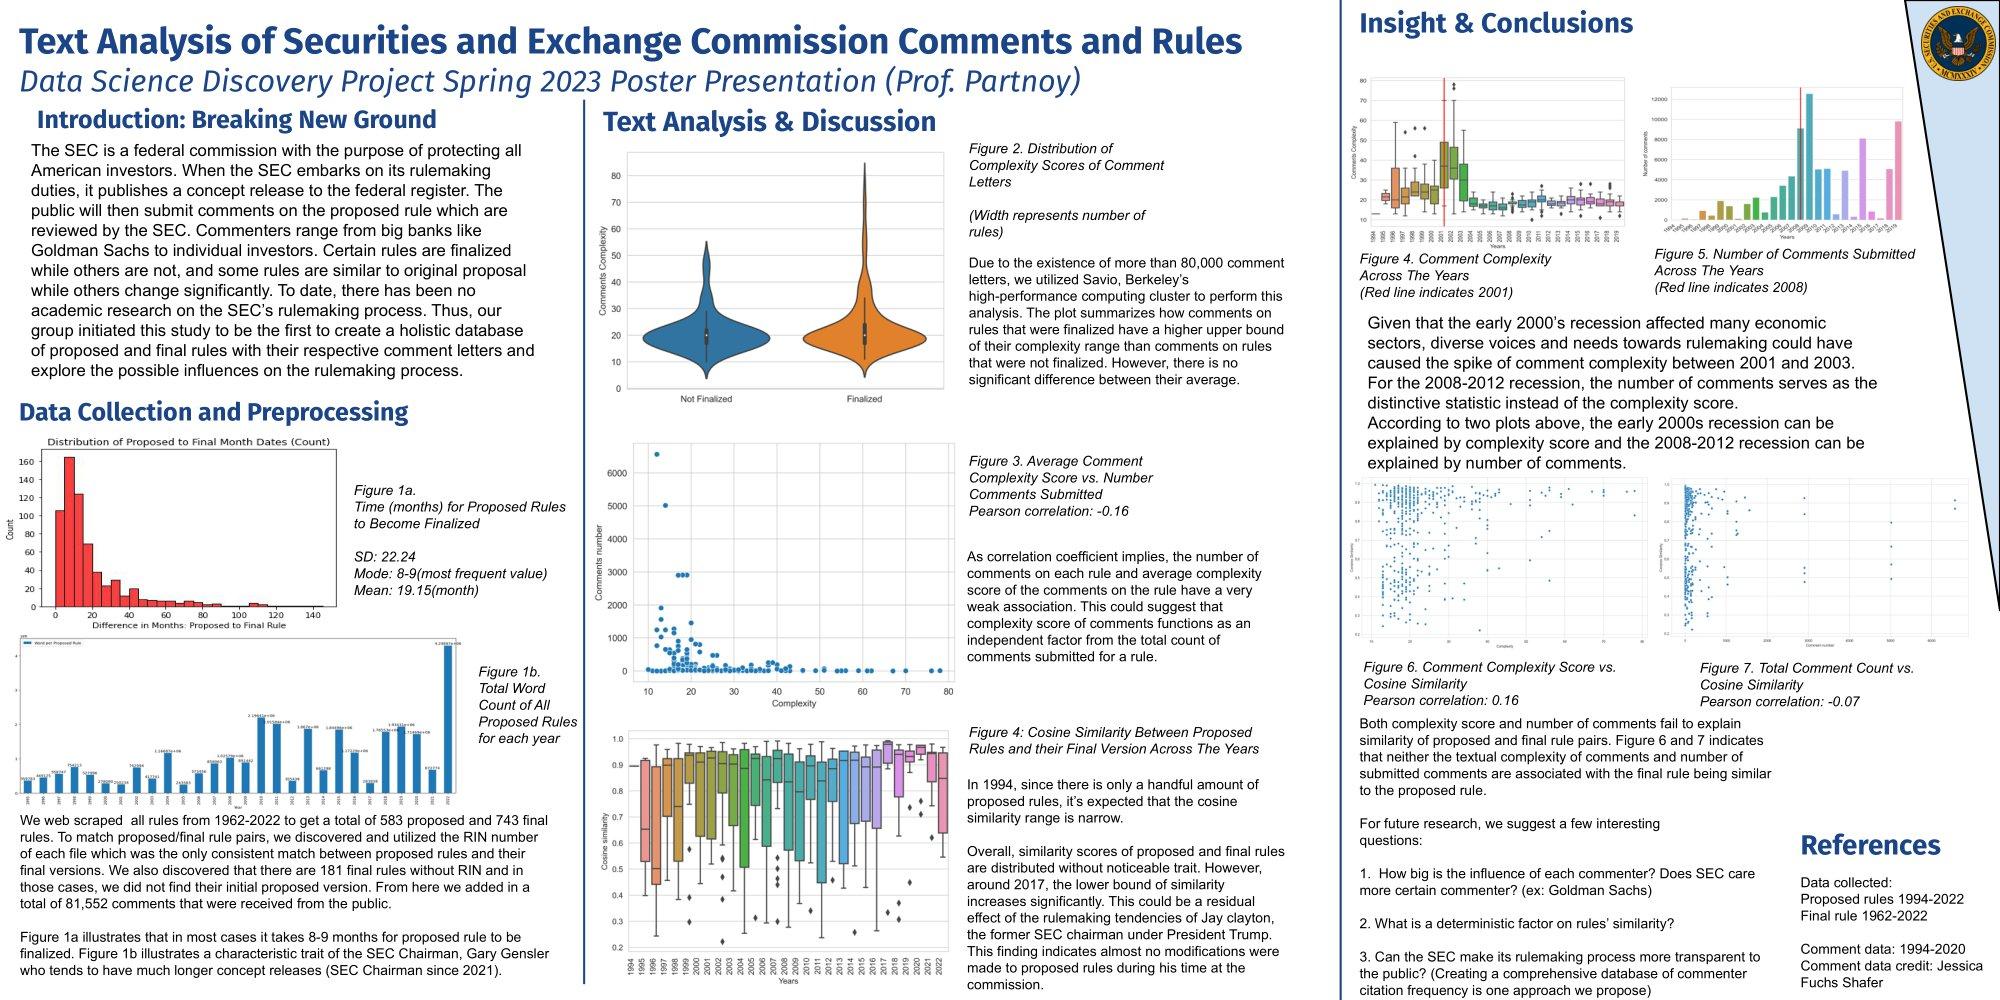 Text Analysis of Securities and Exchange Commission Comments and Rules - Spring 2023 Discovery Project